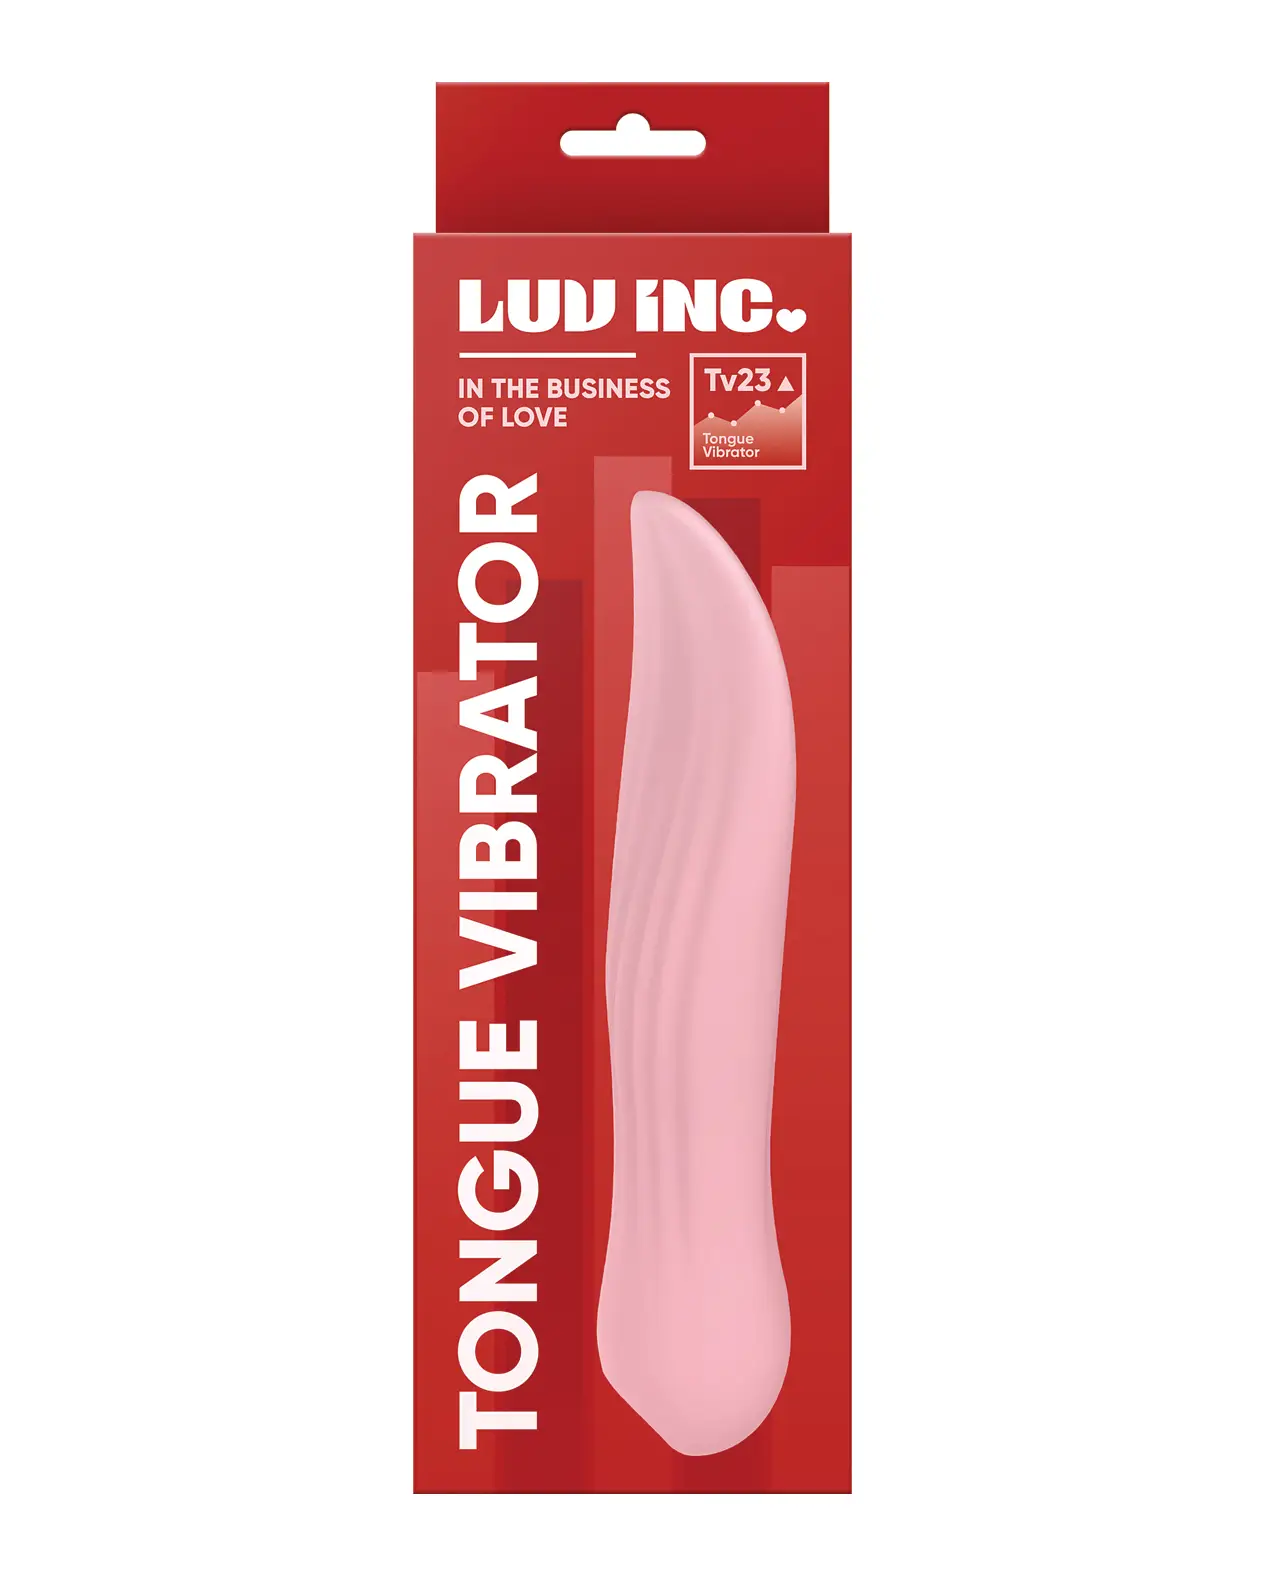 Vibrator with a Tongue shaped tip in pink on a red box